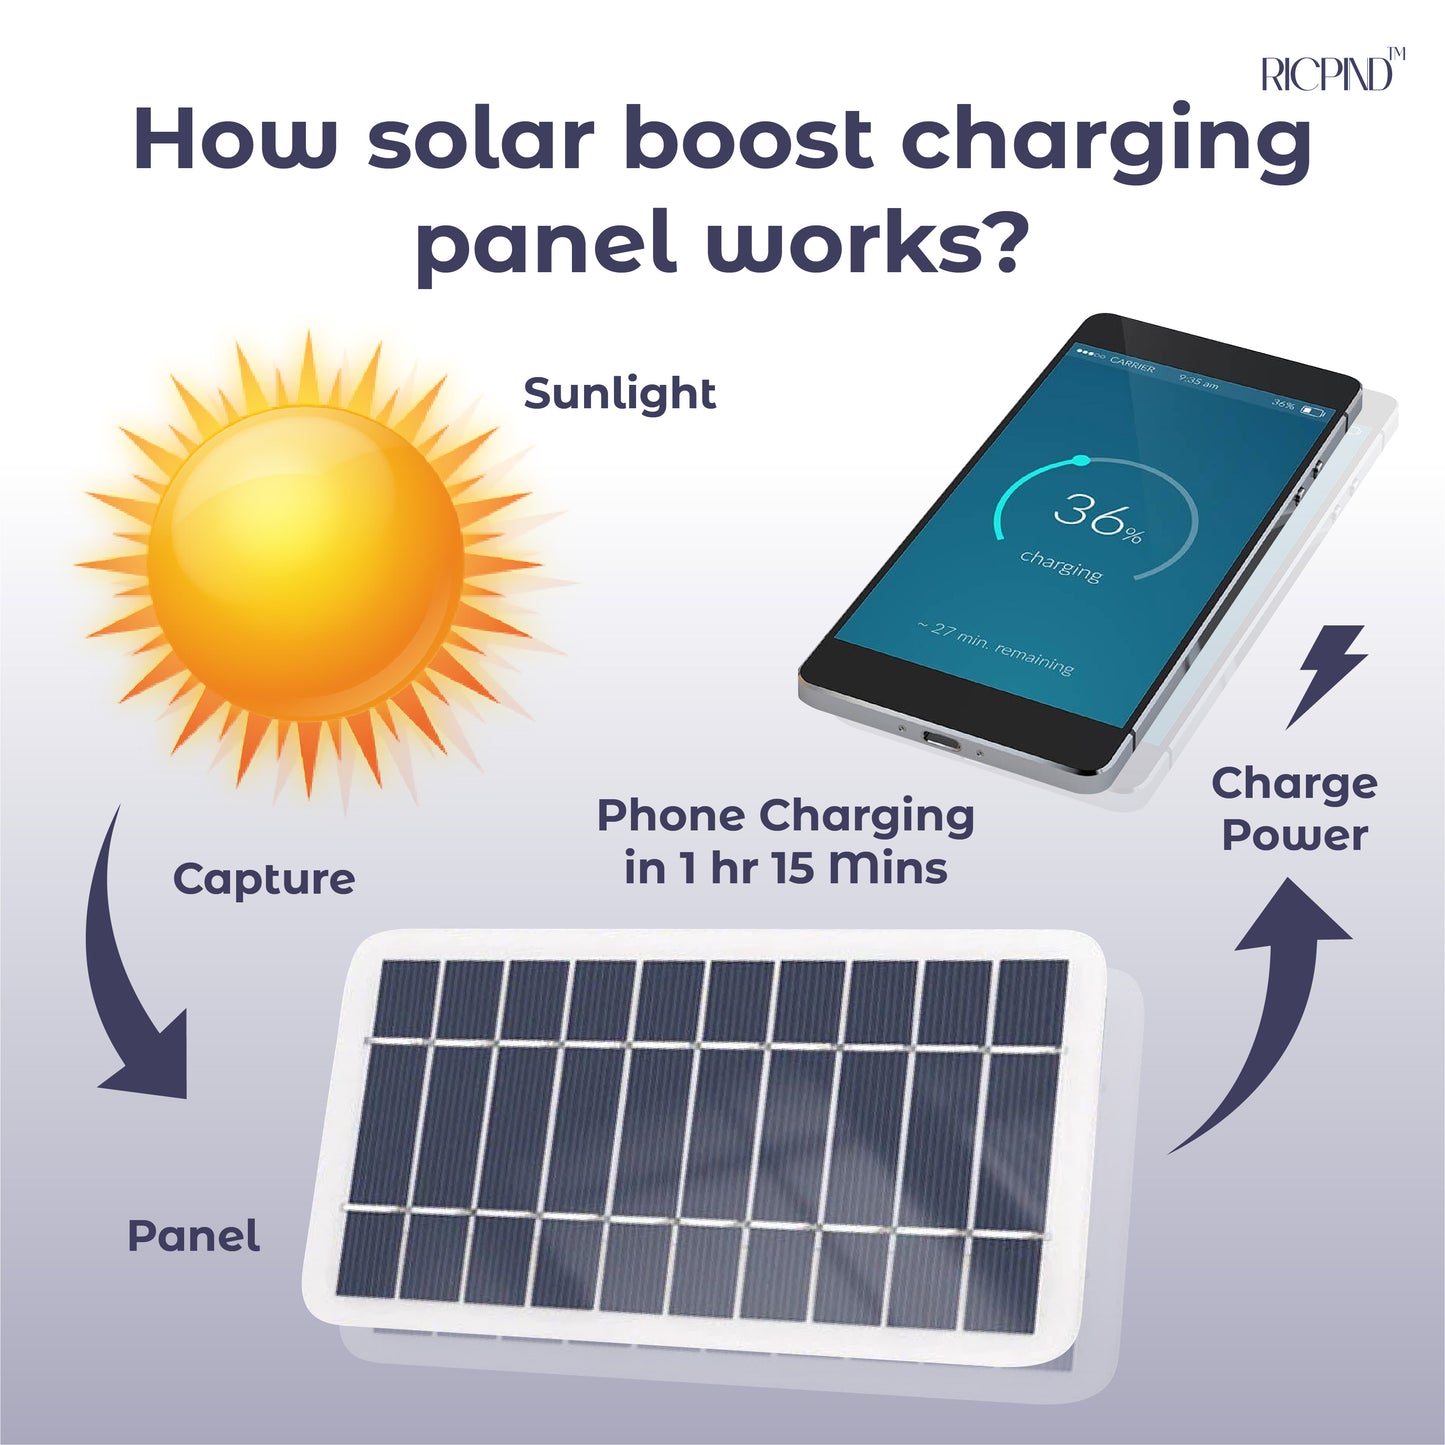 RICPIND Solar Boost Charging Panel